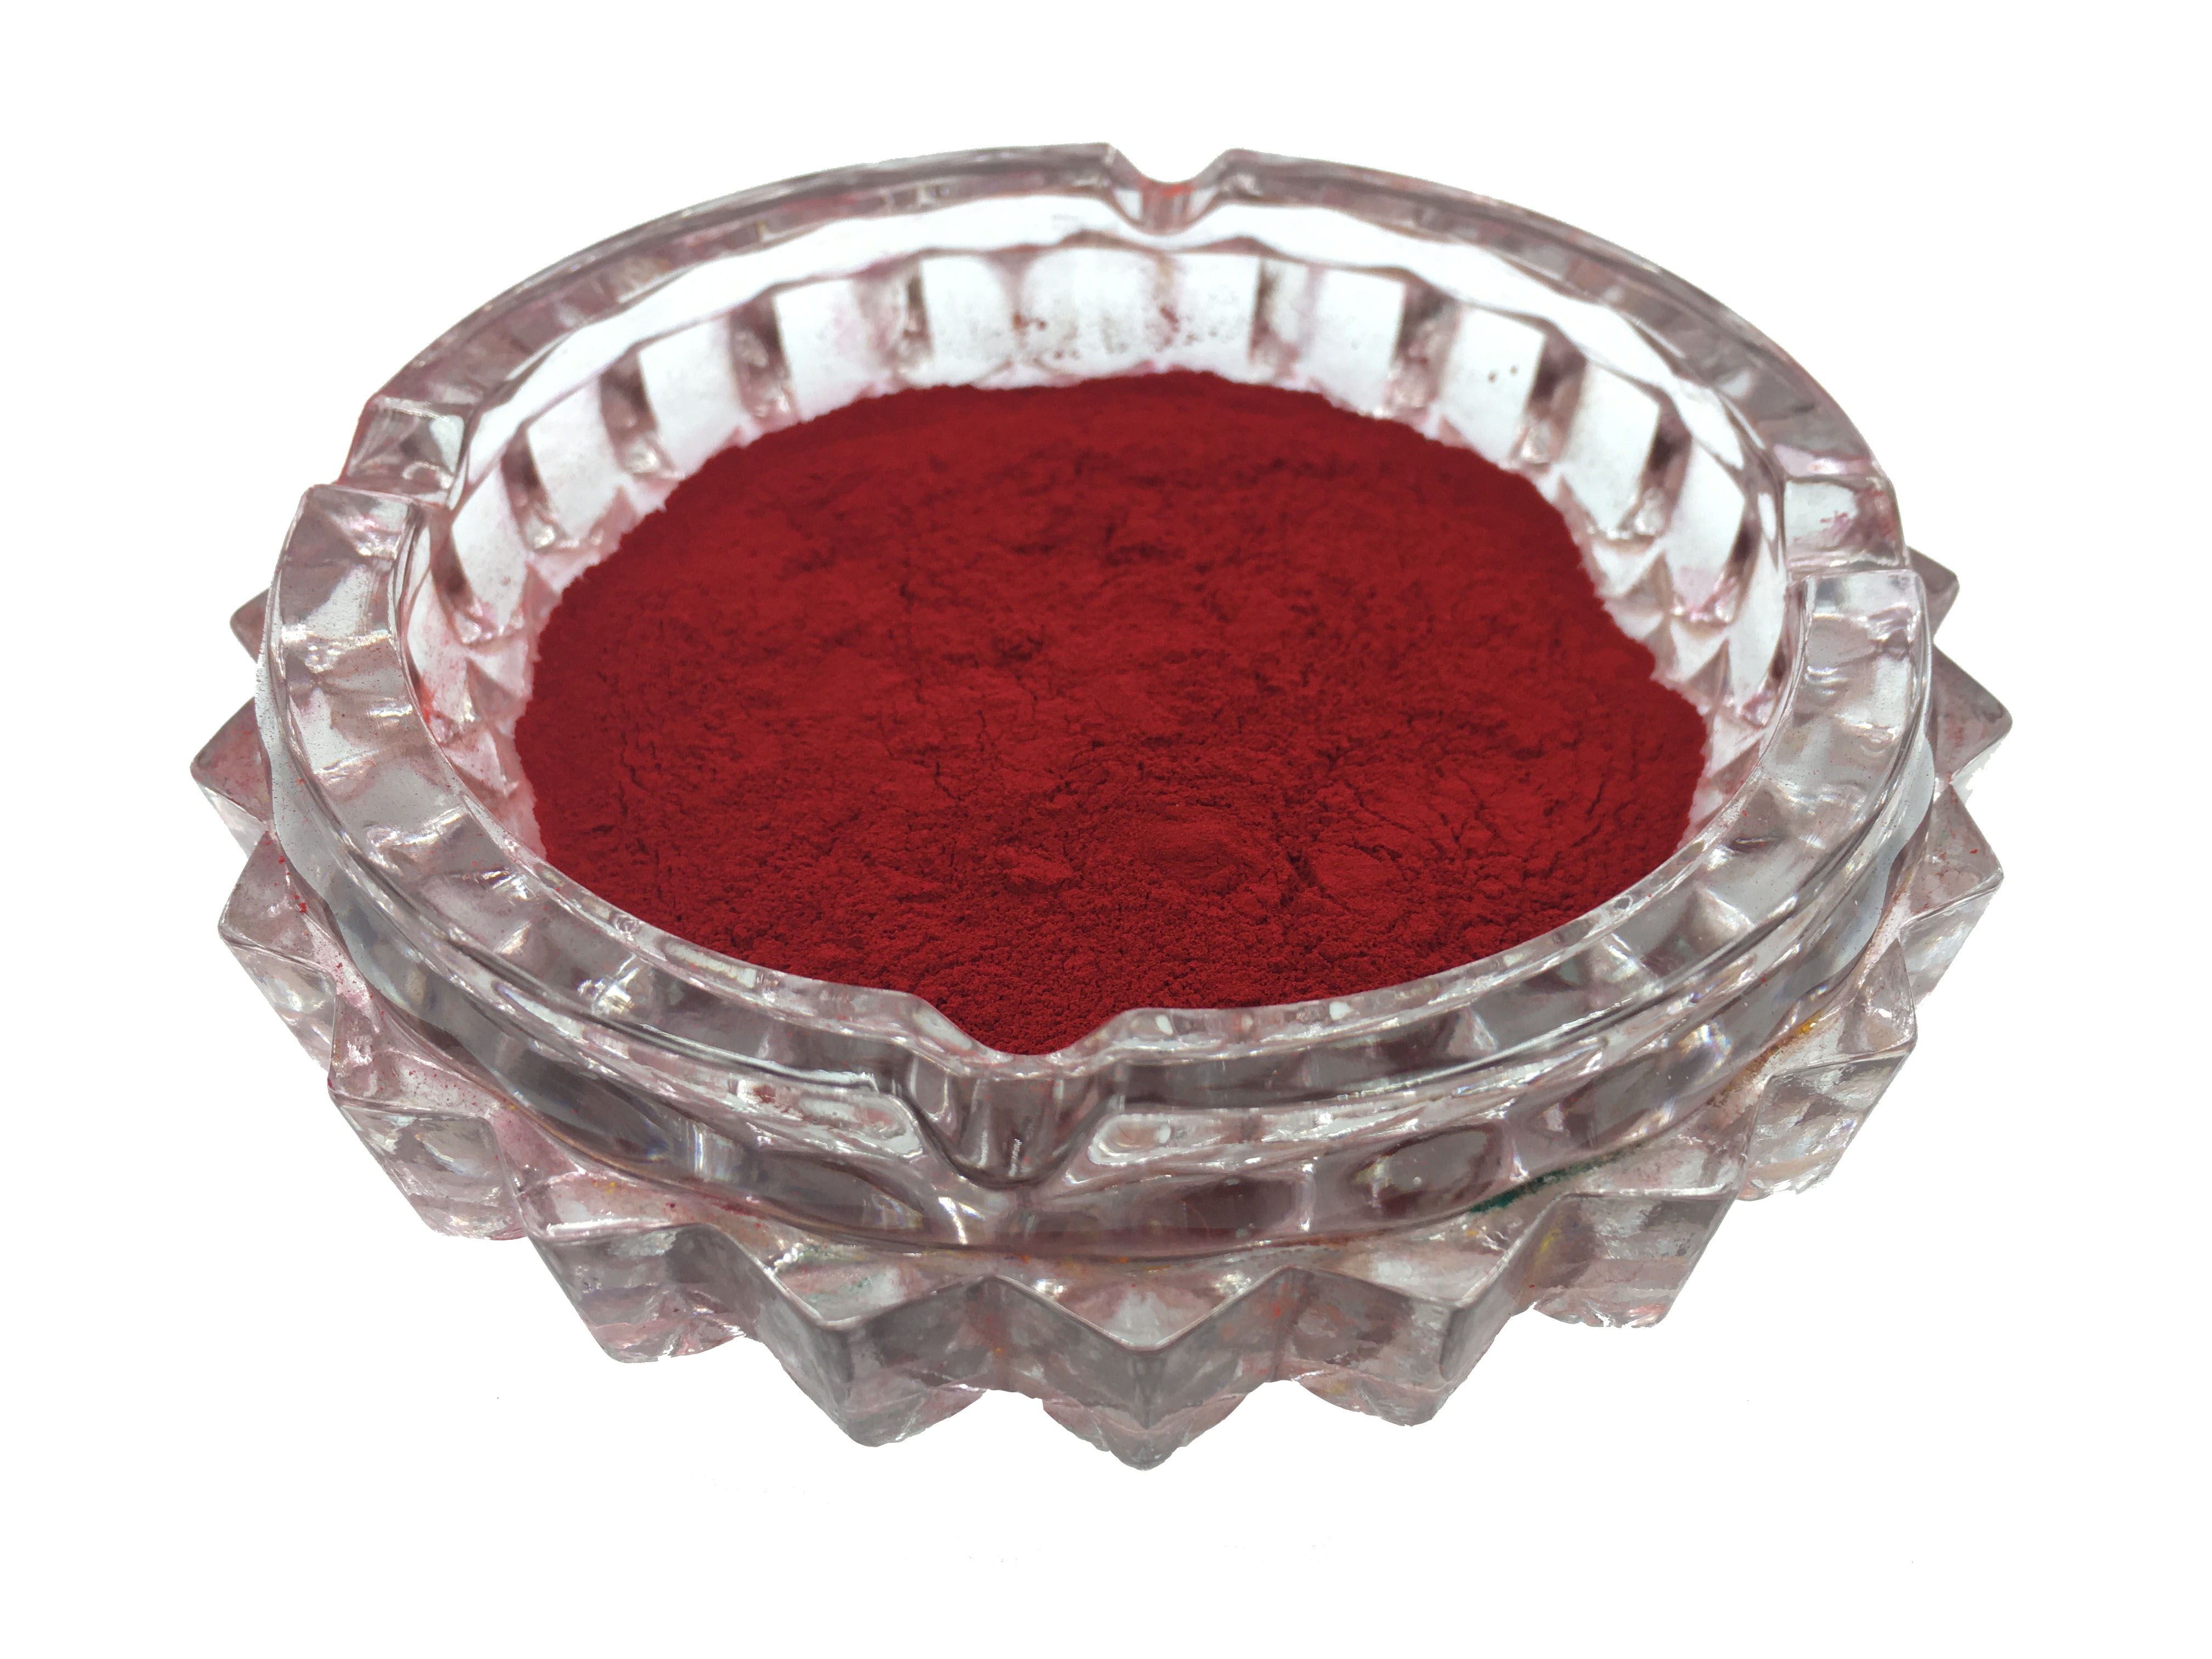 Pigment for Seeds Pigment Powder Red RY For SP/SL